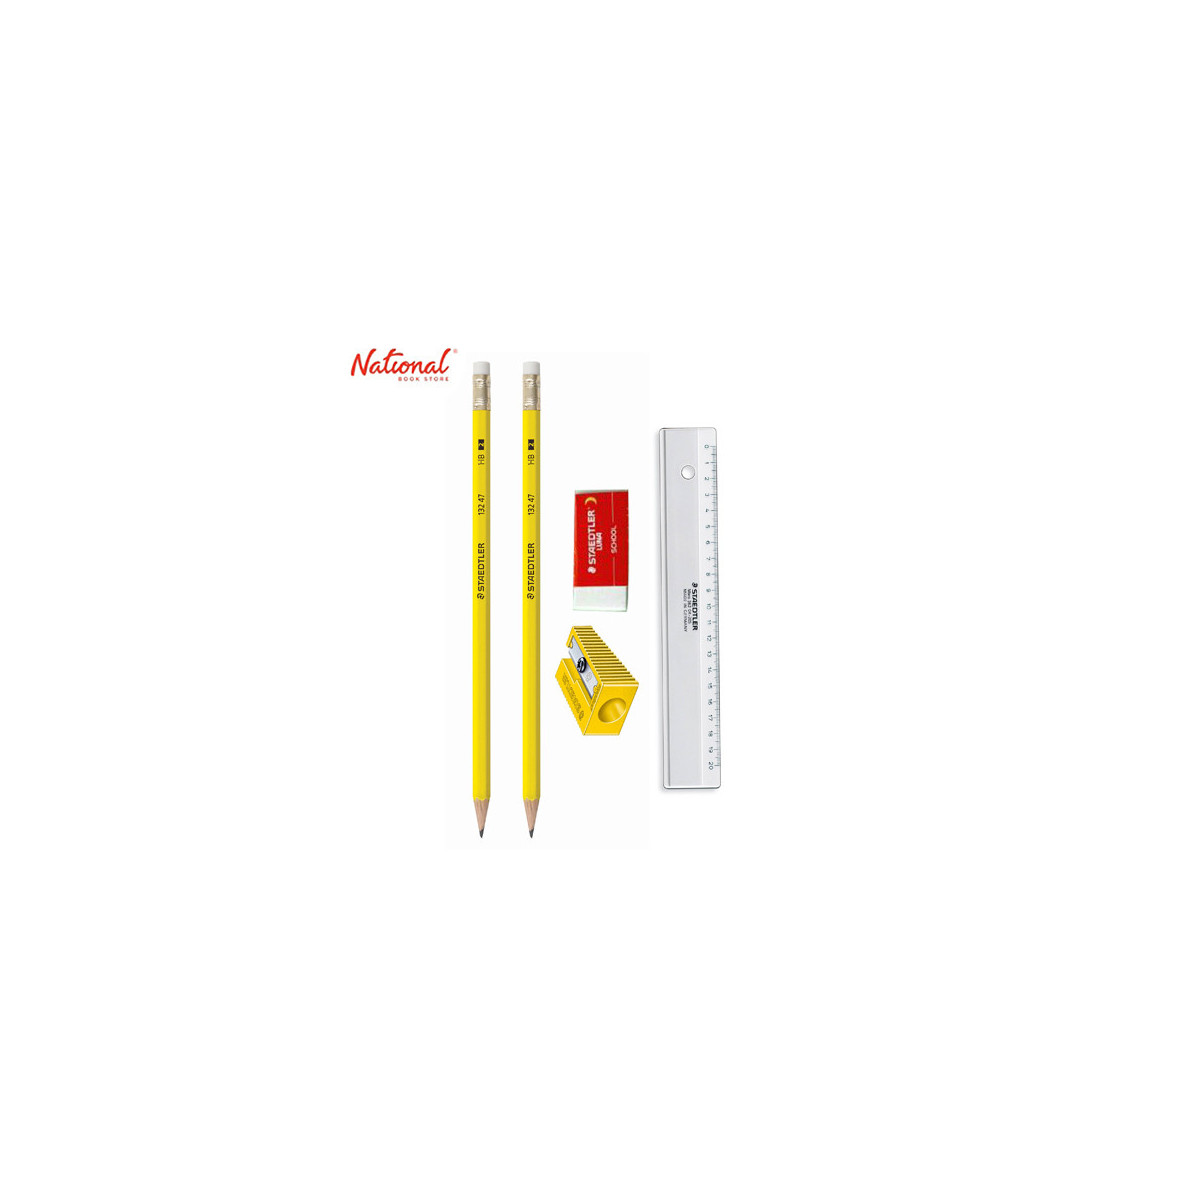 Staedtler 2B Wooden Pencils Yellow 2's with Eraser, Sharpener and Ruler 132472B/2L400KP150